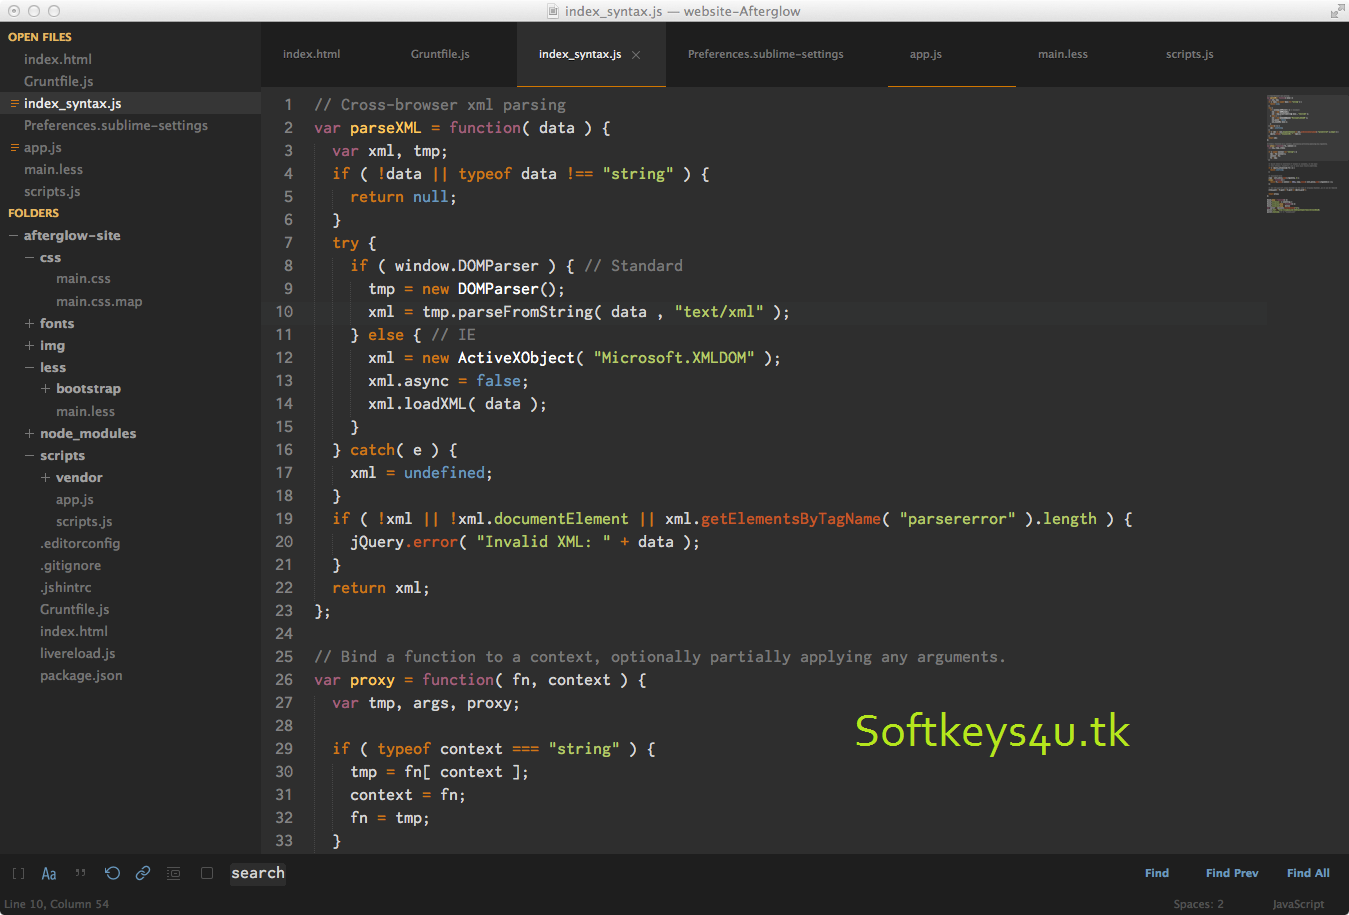 sublime text 3 free license